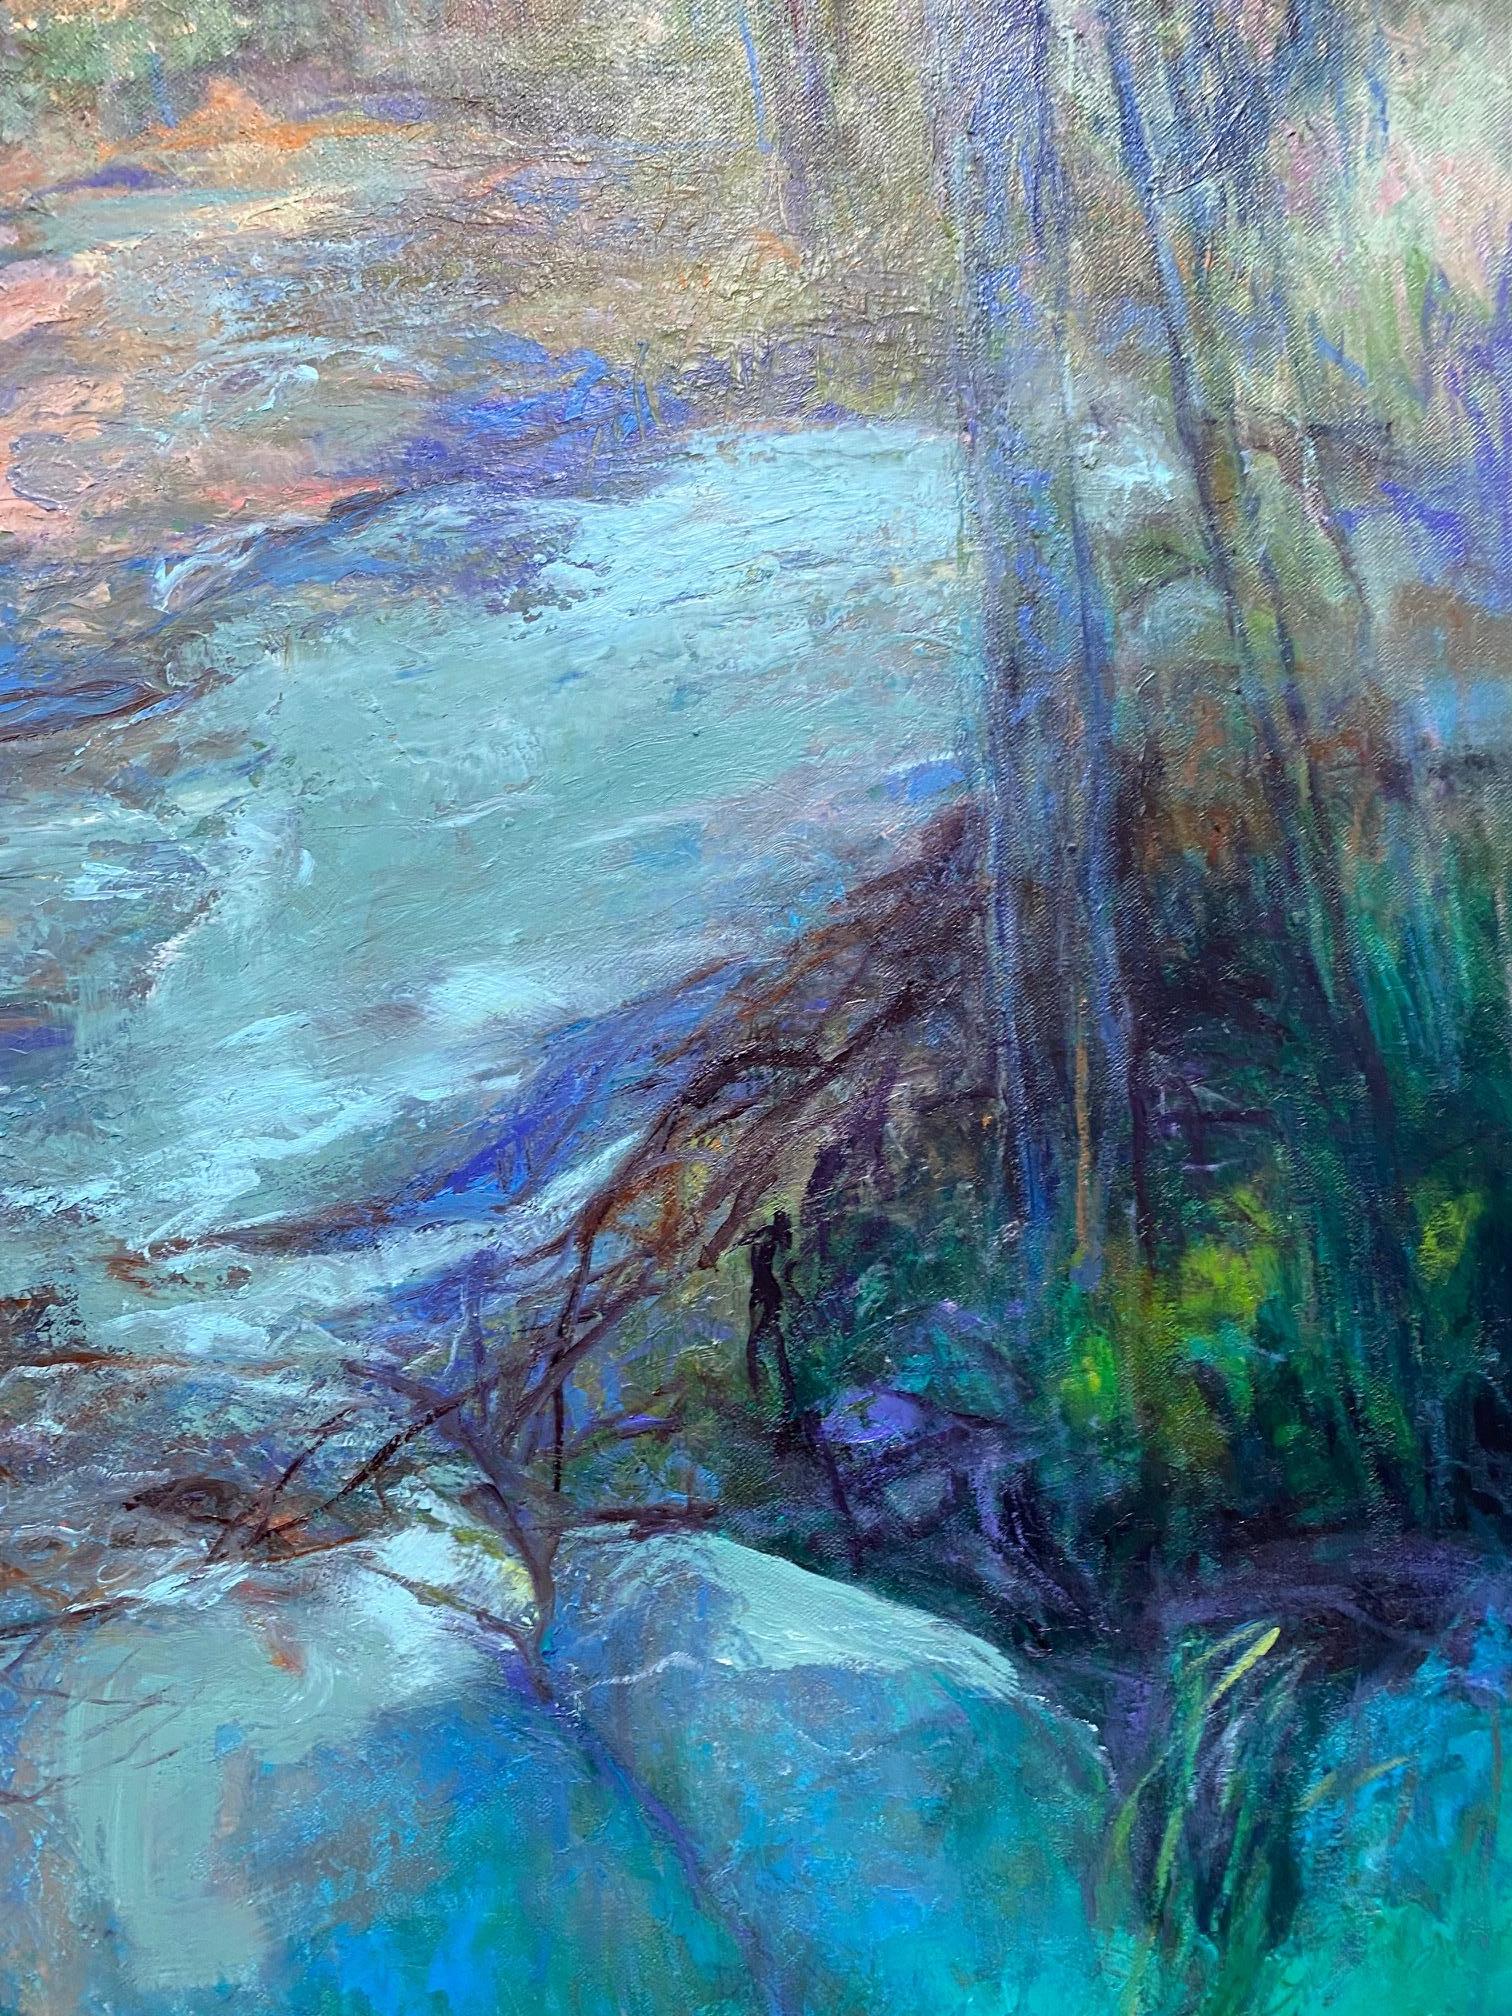 Always exploring the depths of nature through color and light, artist Catherine Wagner Minnery reaches off the path into an abstract expressionist landscape to consider the importance of nature's majesty. The water moves and slides and then